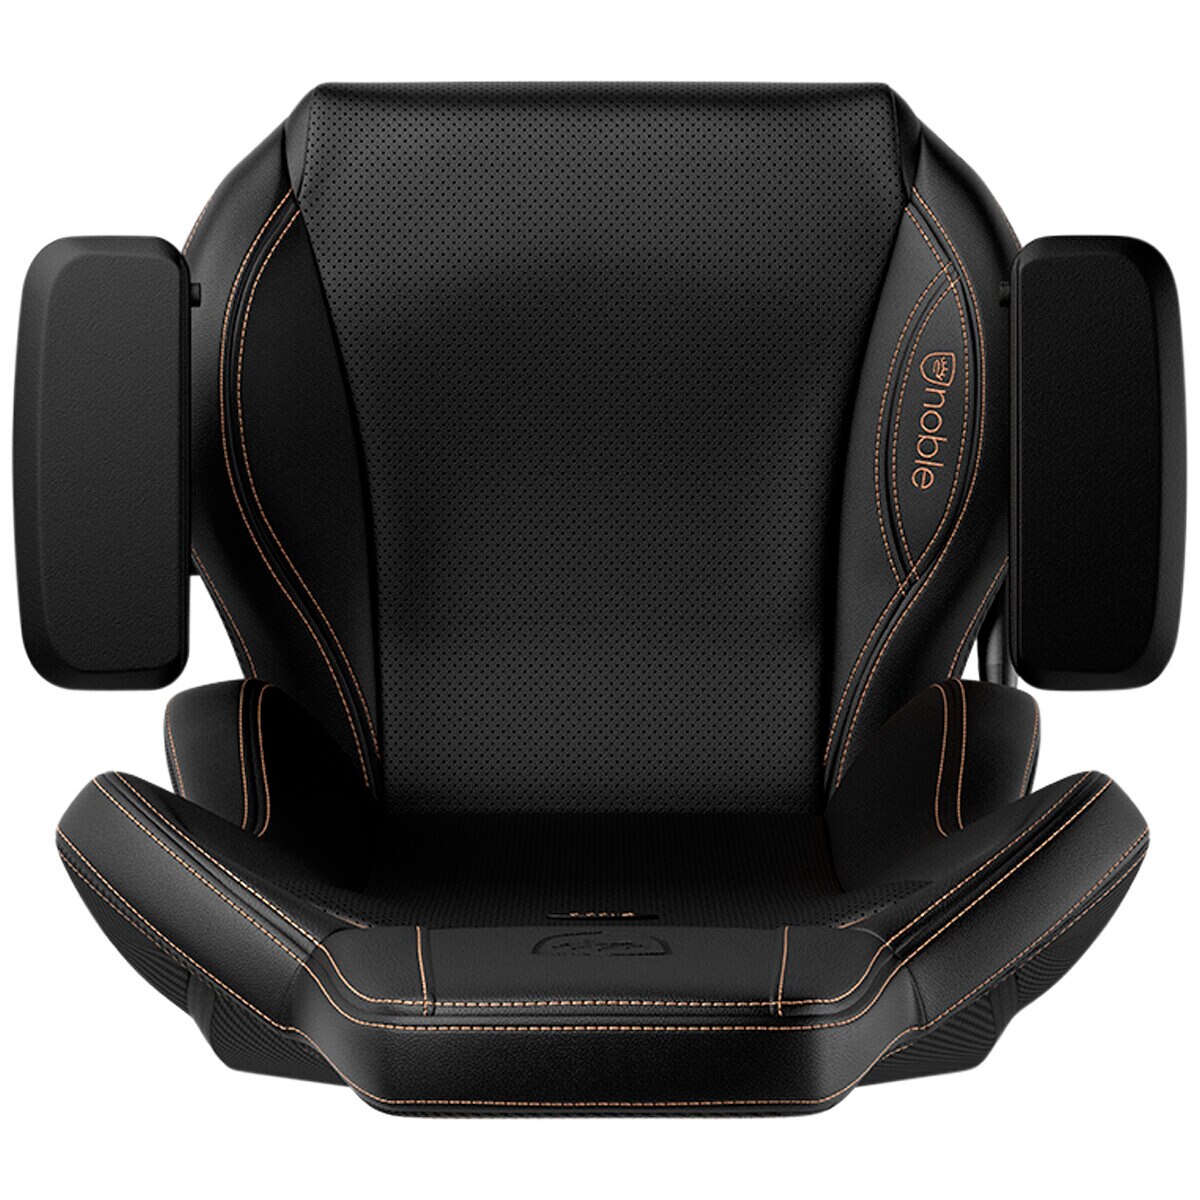 NobleChairs Epic Copper Limited Edition Gaming Chair Black Copper